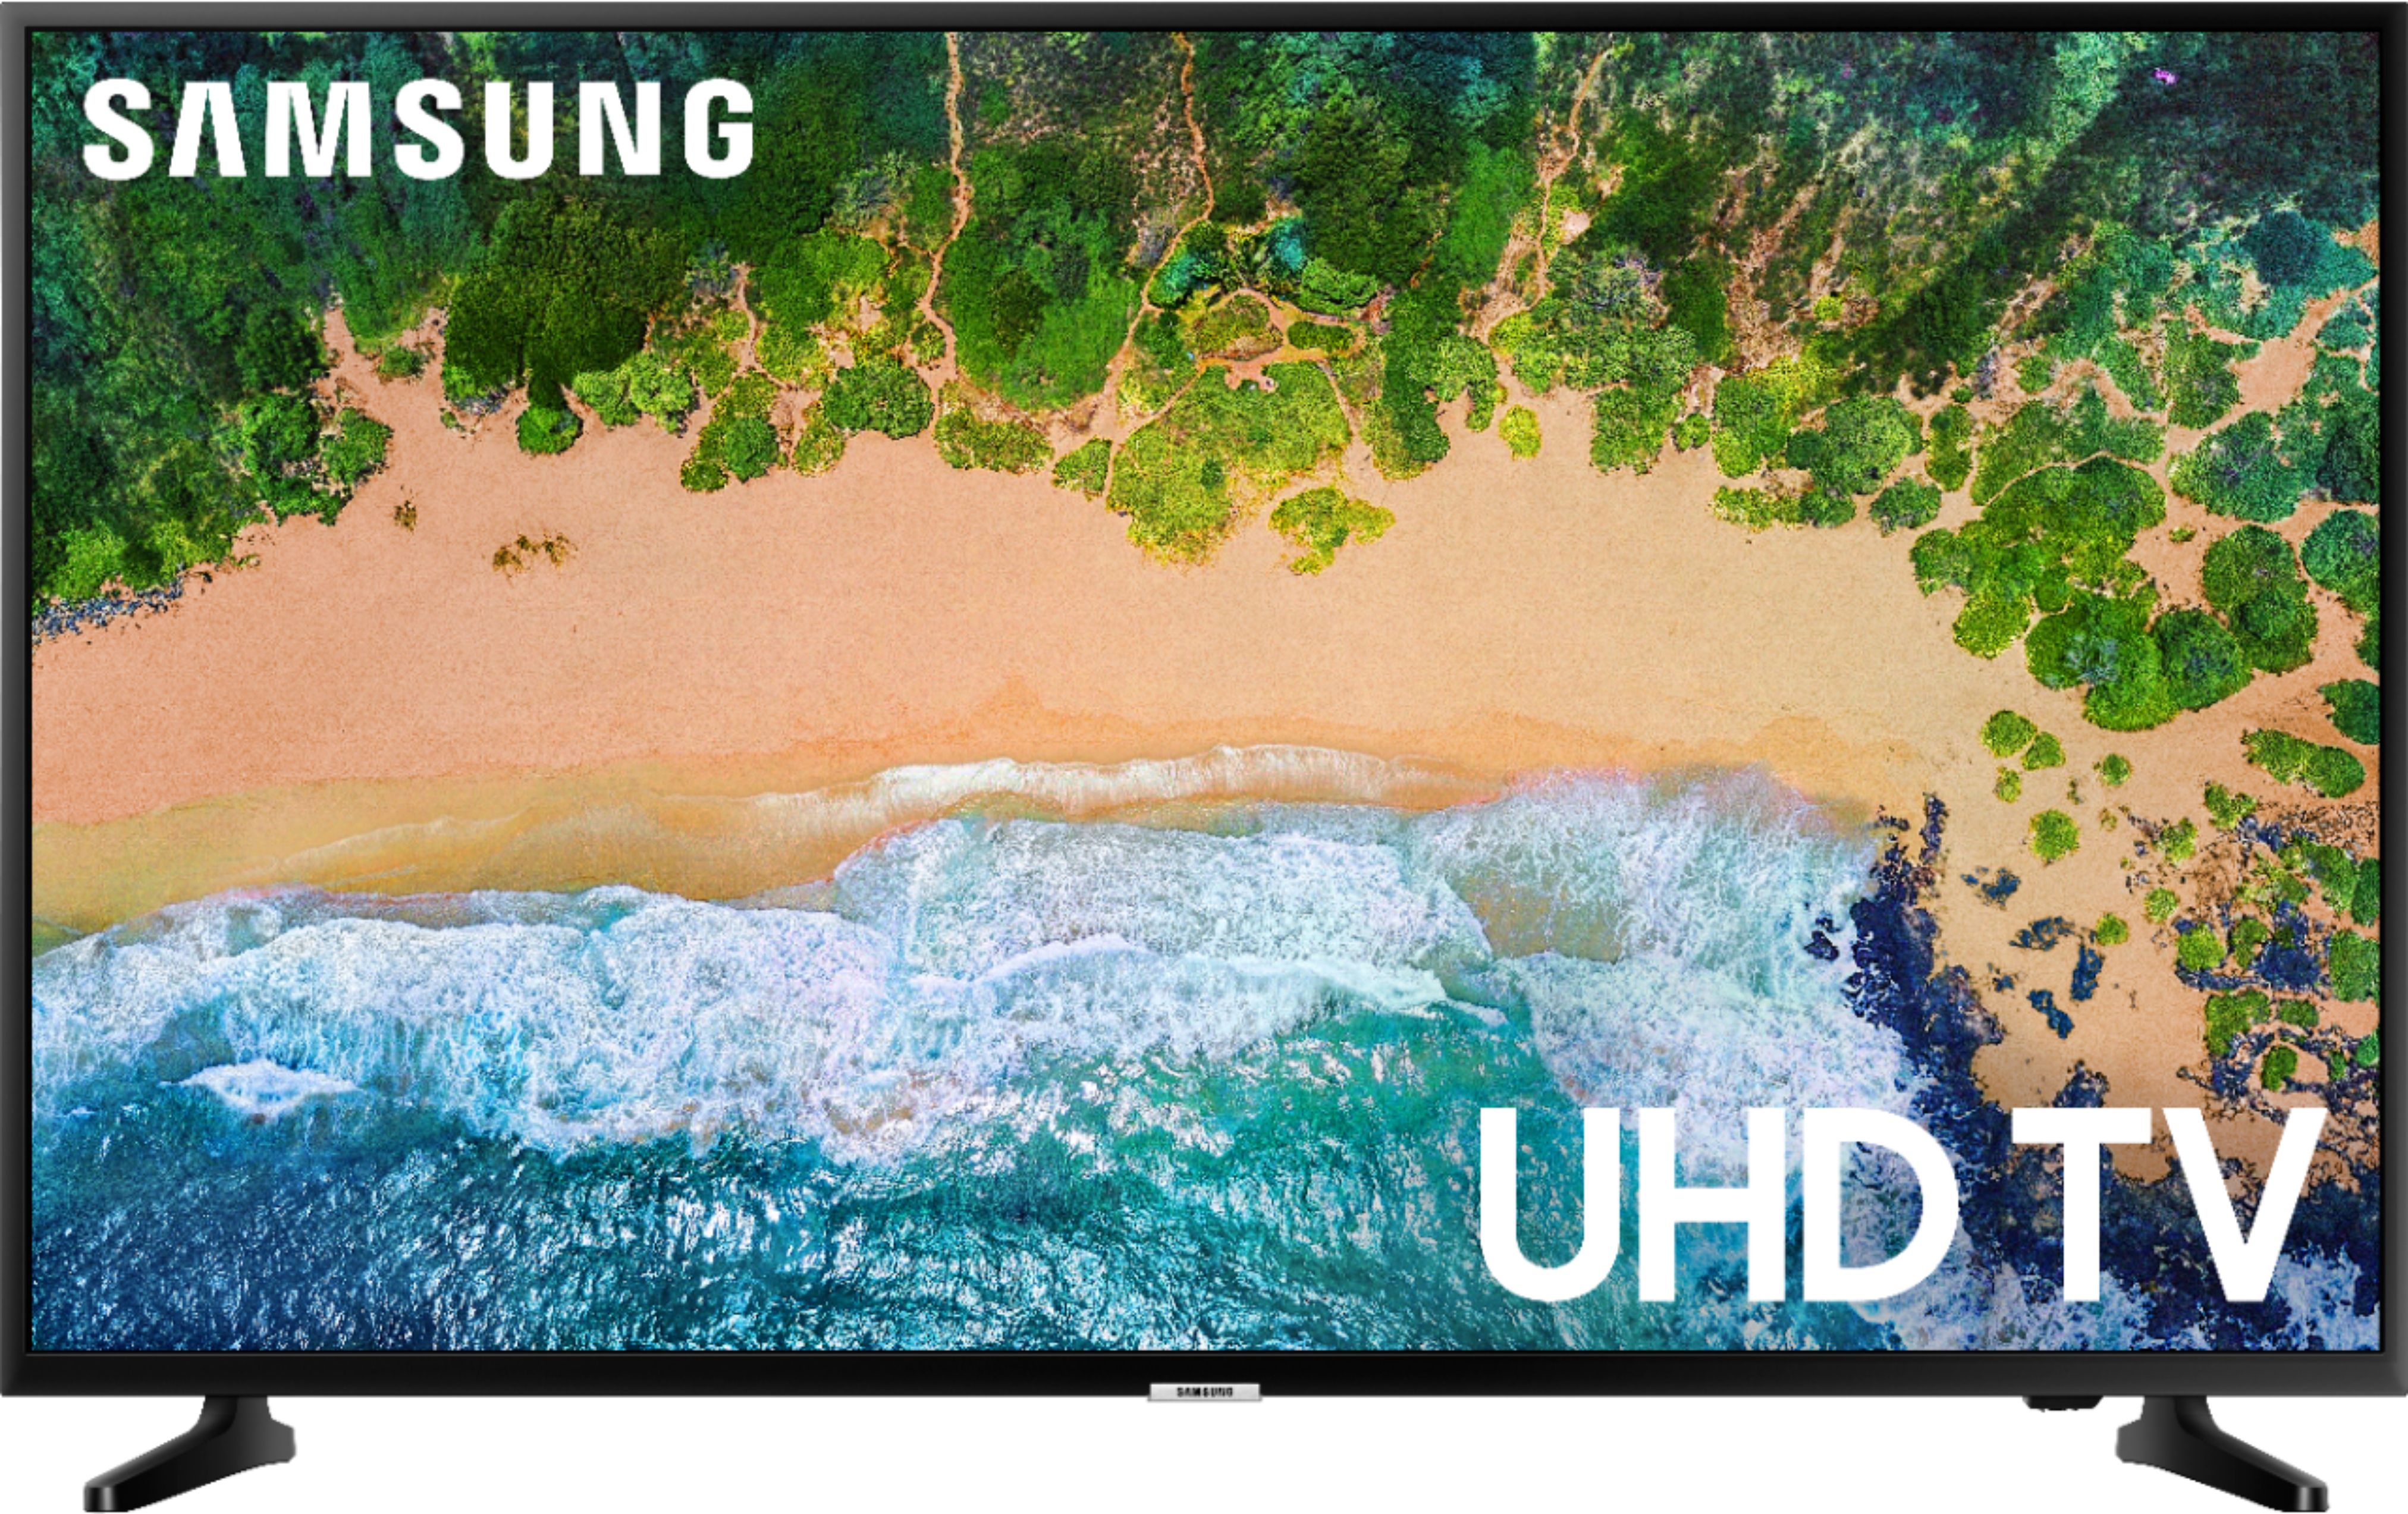 Samsung - 65" Class - LED - NU6070 Series - 2160p - Smart - 4K UHD TV with HDR